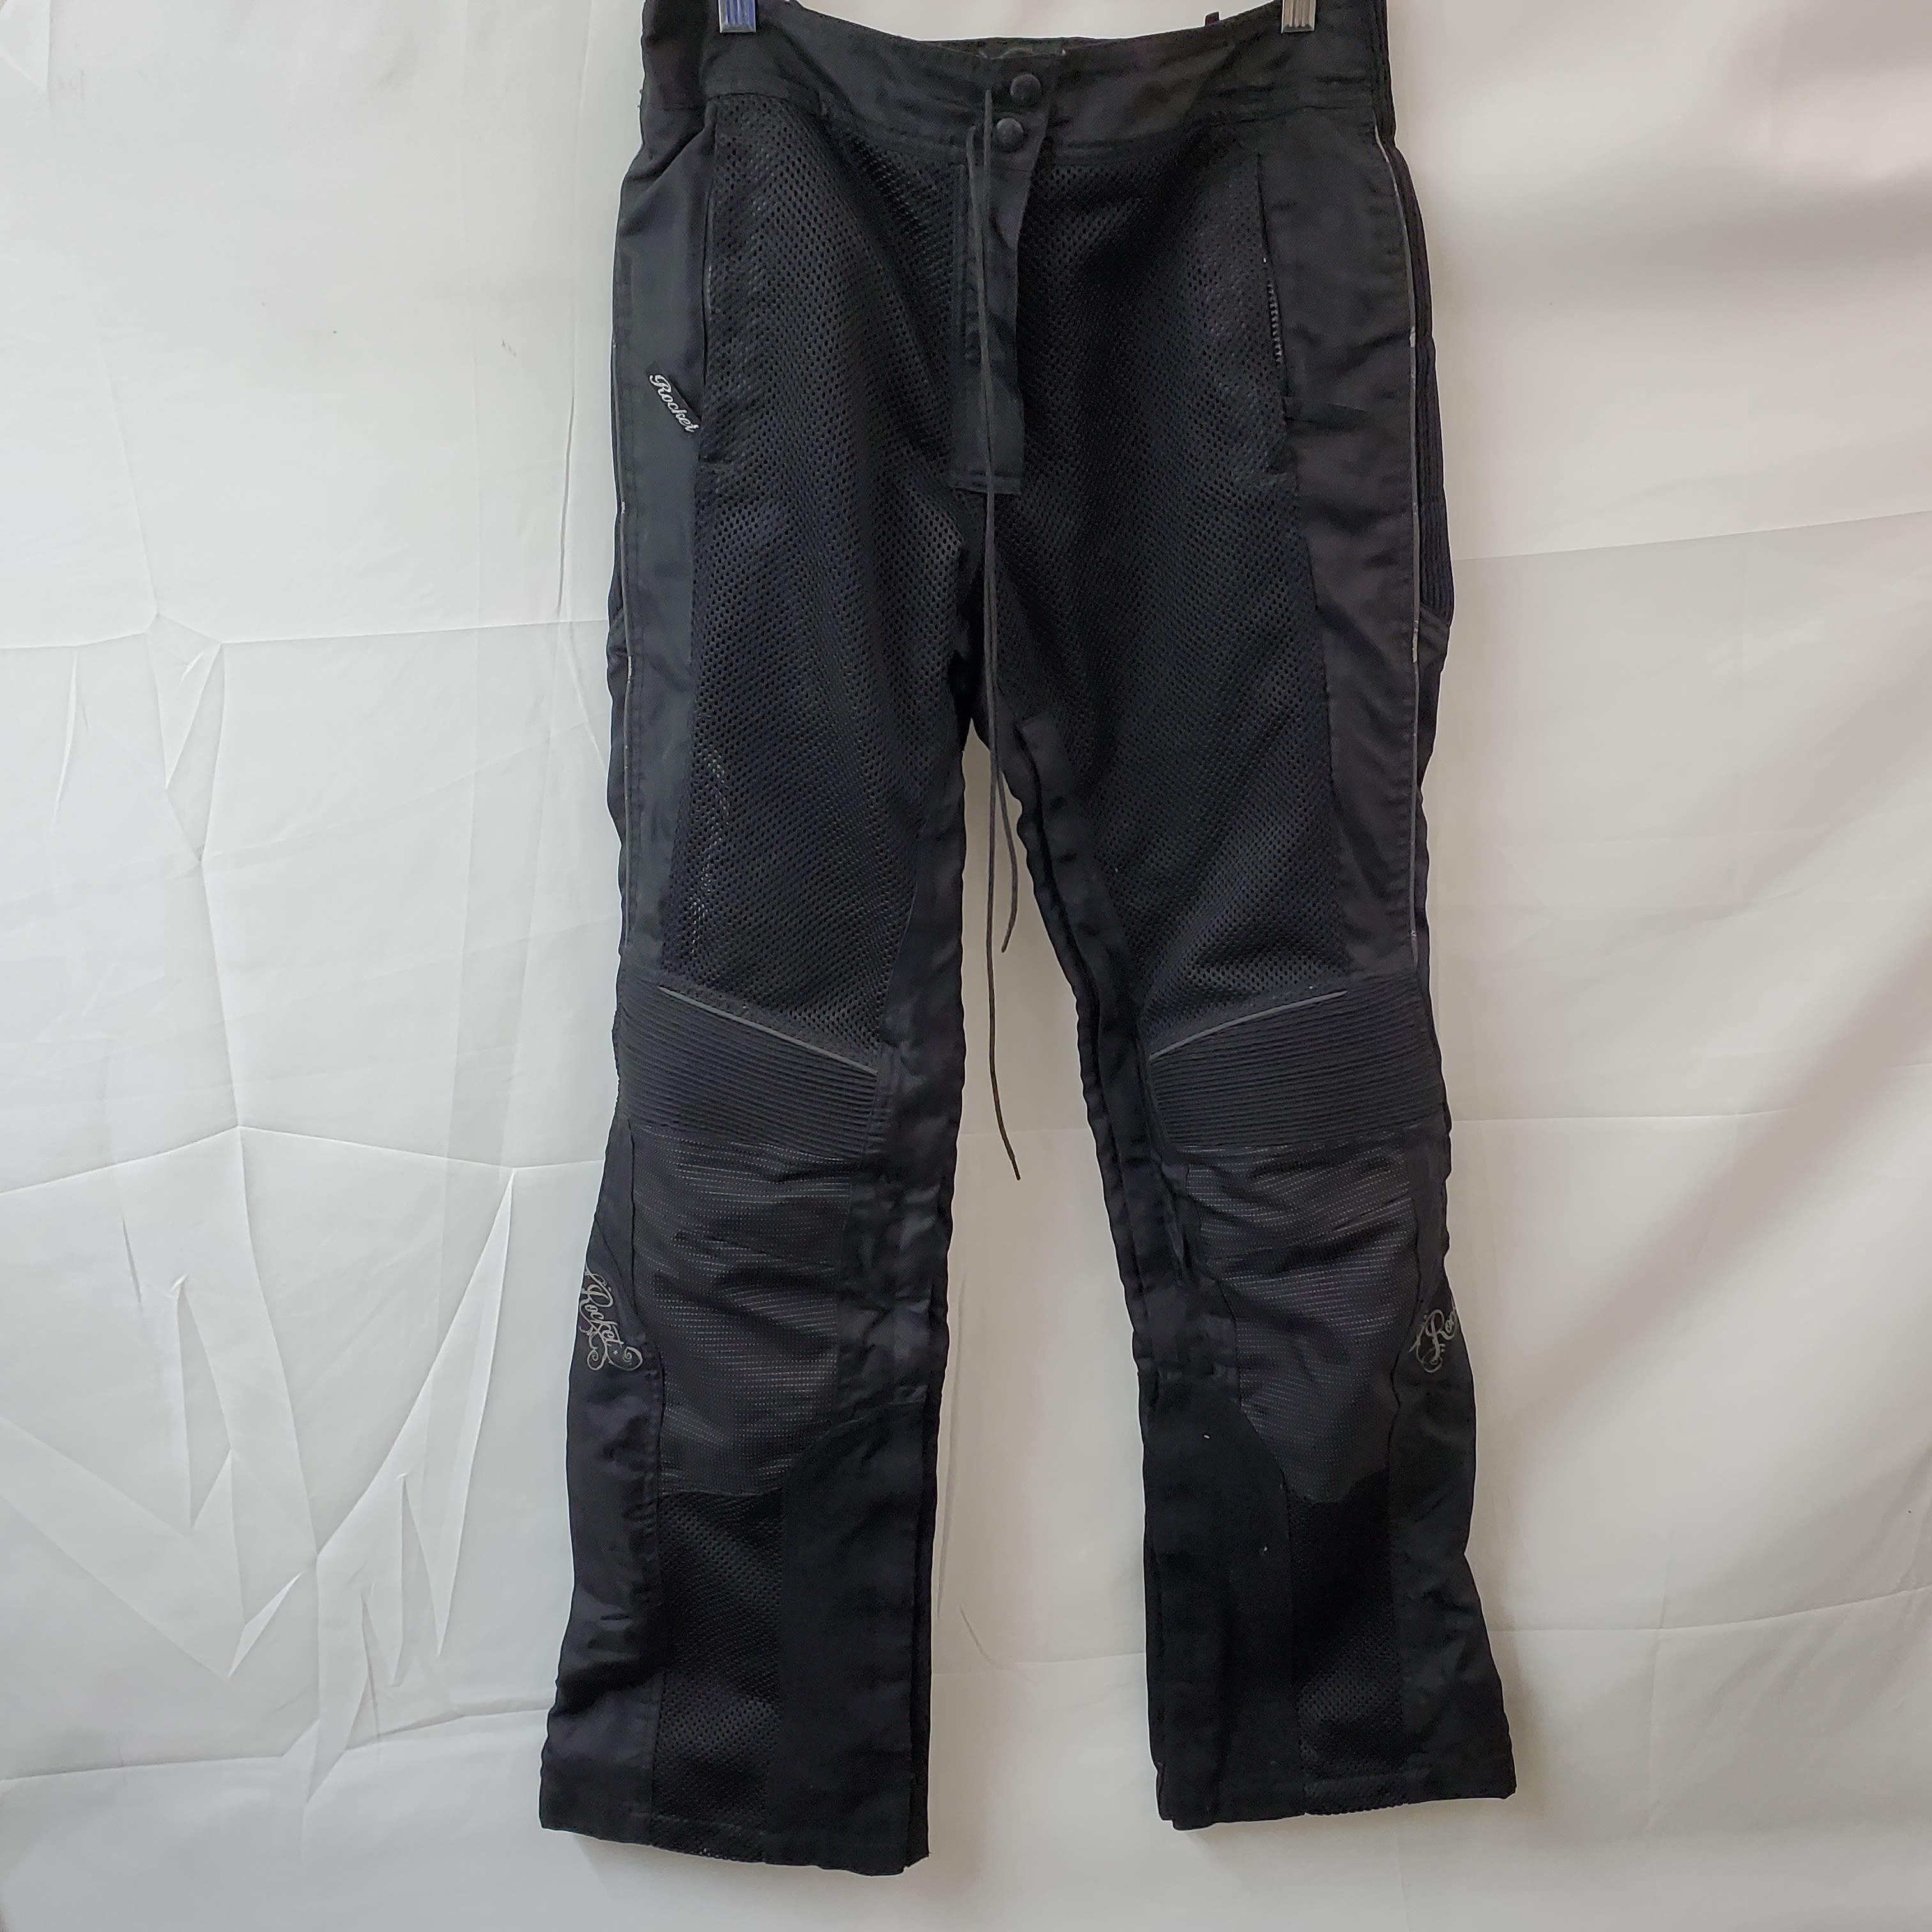 JOE ROCKET MENS LEATHER MOTORCYCLE RIDING PANTS MEDIUM 34 - clothing &  accessories - by owner - apparel sale 